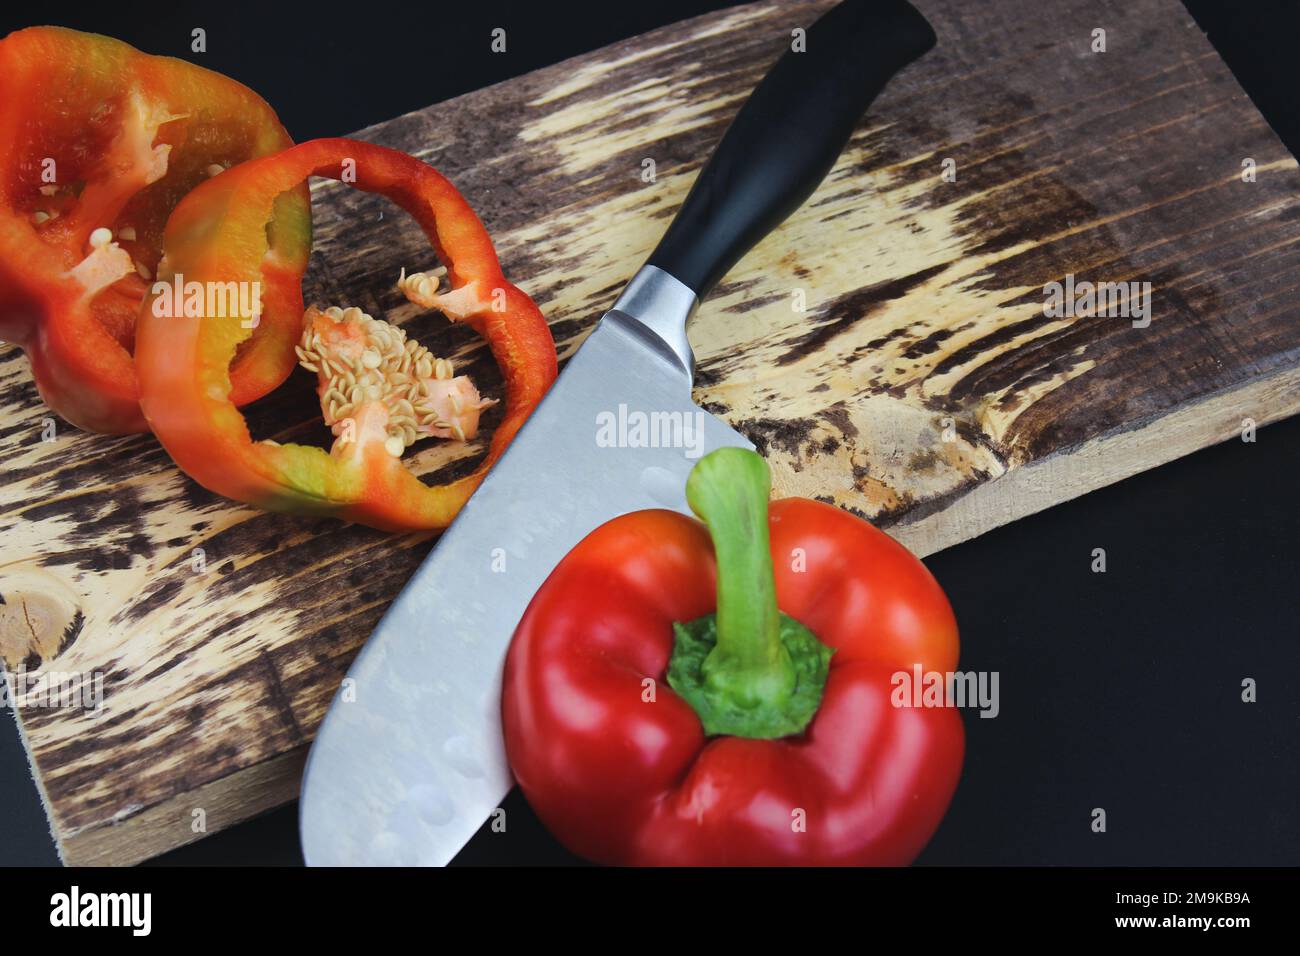 Circles of red pepper on a cutting board. High Angle View Of pepper Slices With Knife On Cutting Board On Dark Background Stock Photo